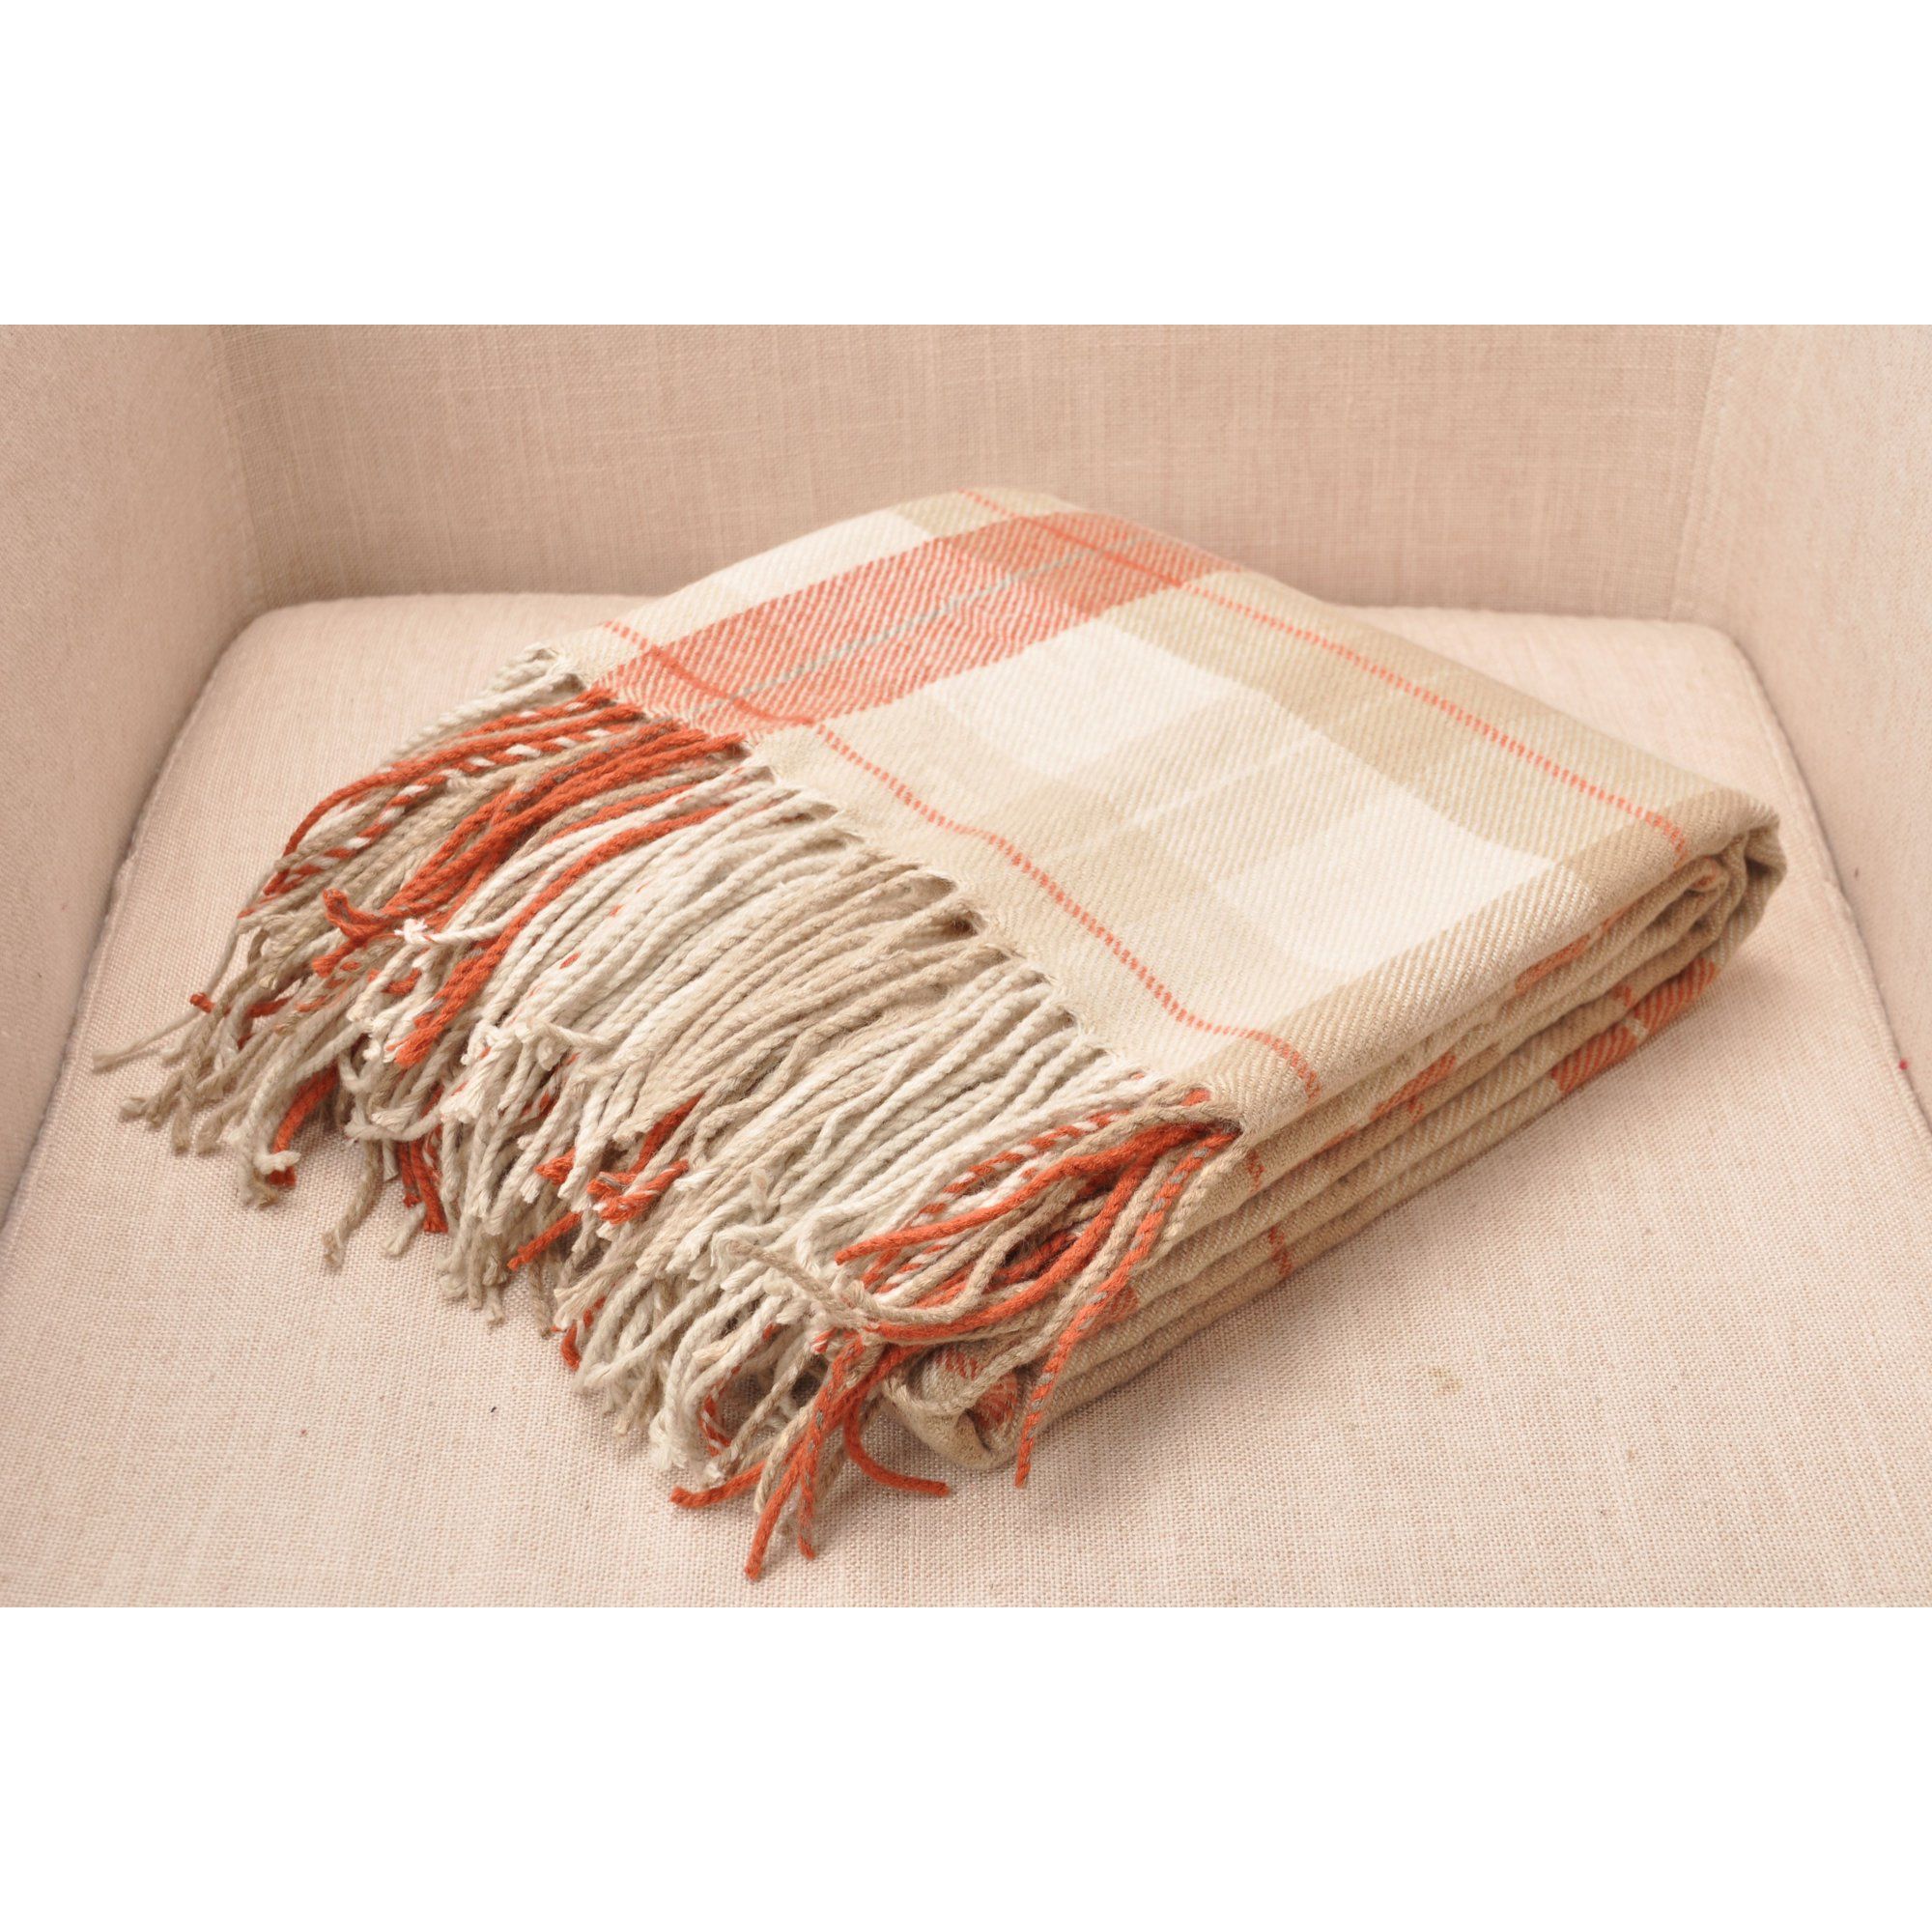 CHLOE'S COLLECTION Buffalo Plaid Blanket Throw With Fringe, Check Pattern,50x60" Orange Color | Walmart (US)